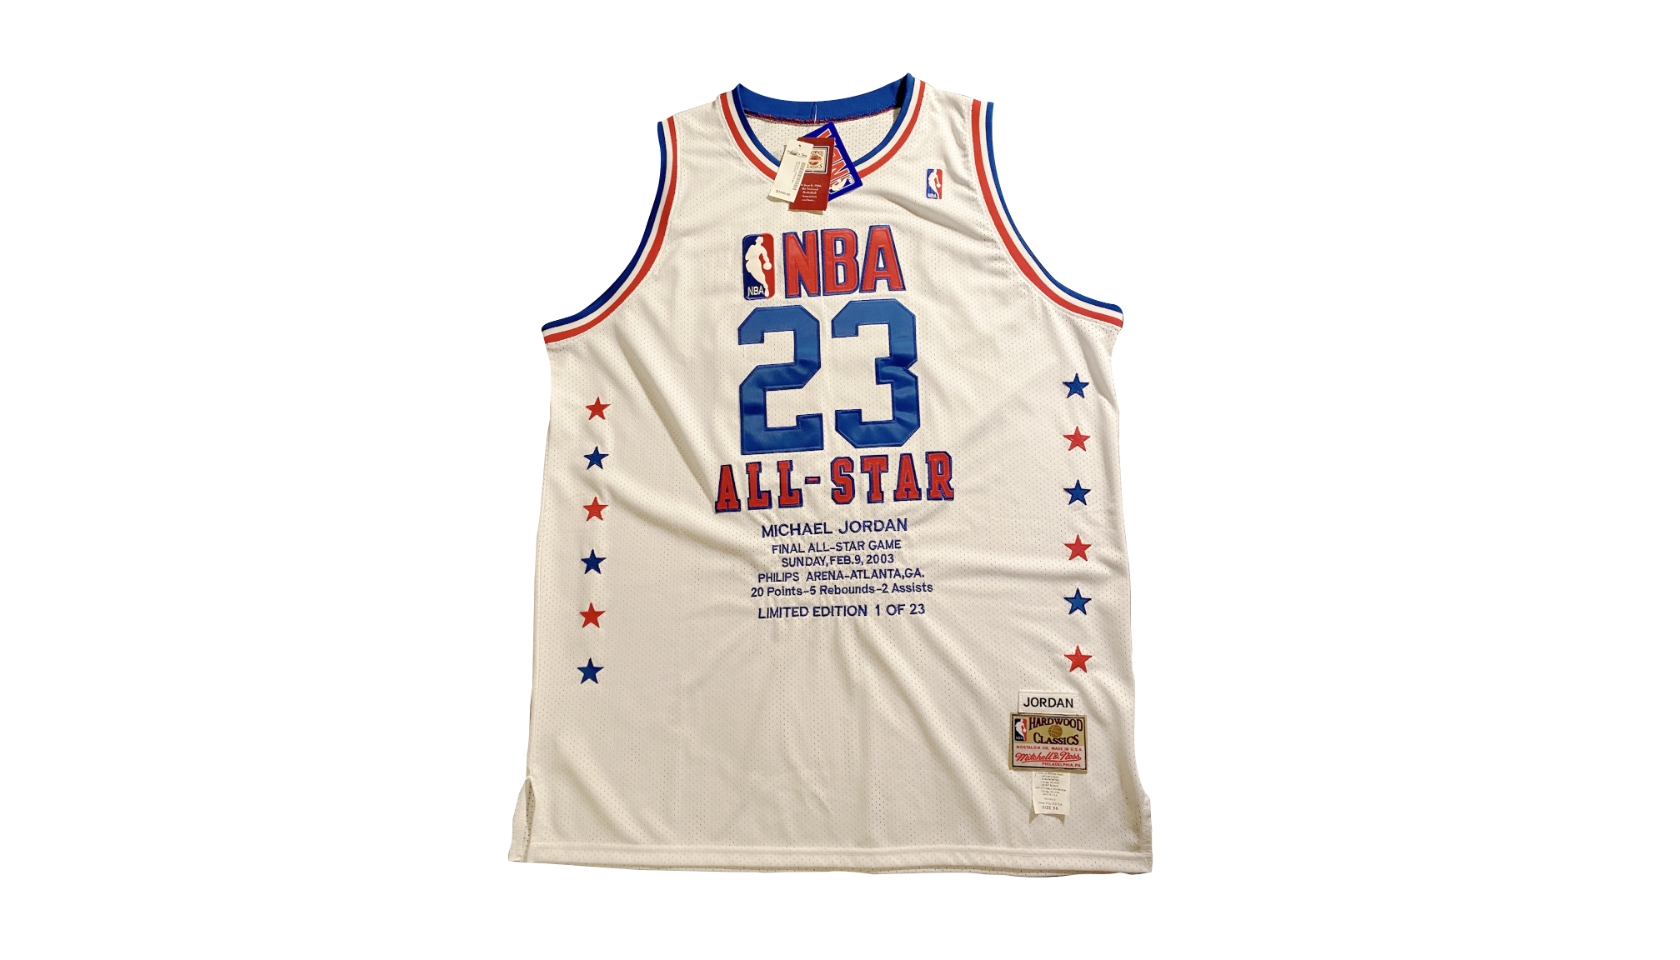 Official Kobe Bryant Signed Jersey, All-Star Game 2003 - CharityStars